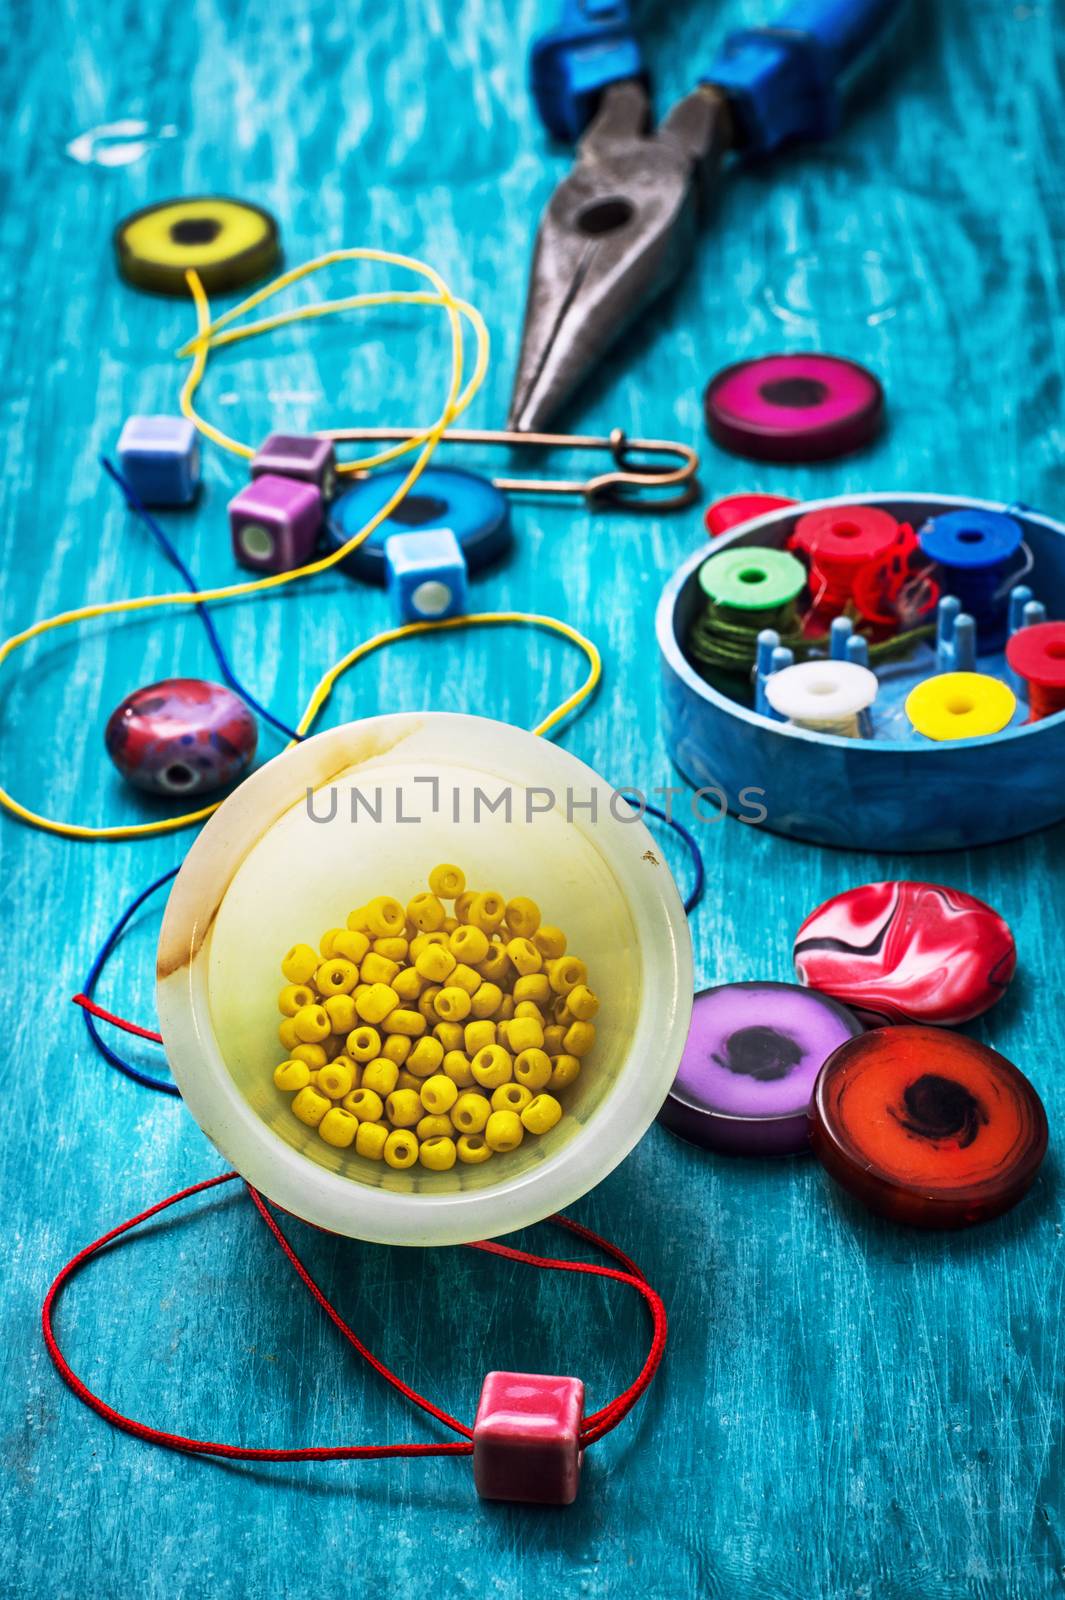 crafts with beads by LMykola